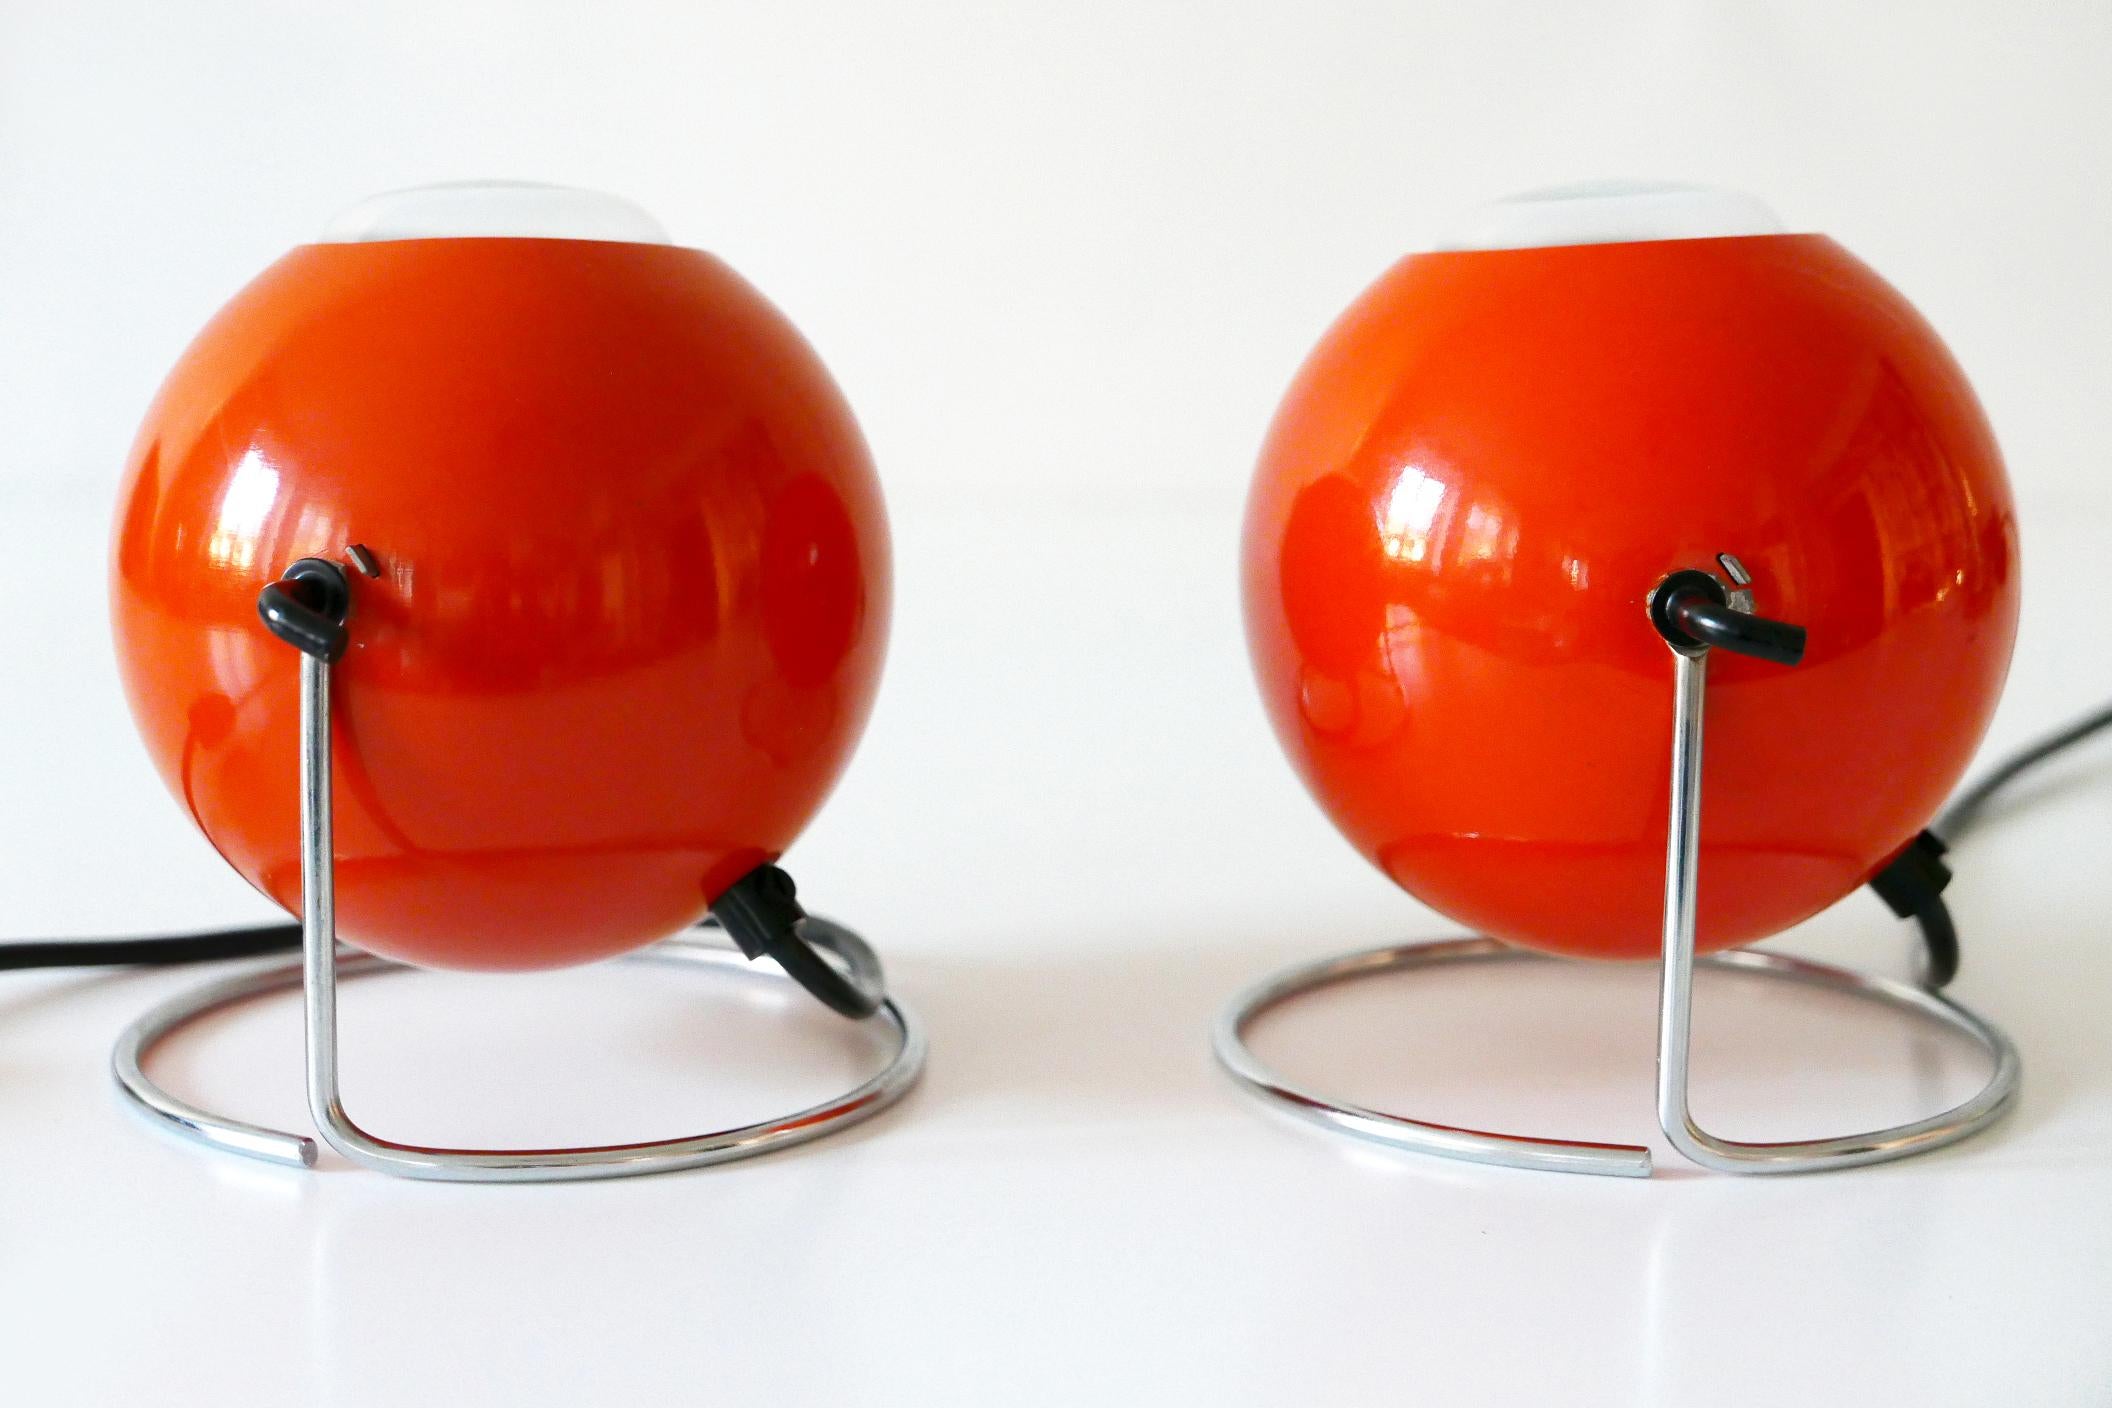 Set of Two Mid-Century Modern Metal 'Eye' Table Lamps, ERCO, 1960s-1970s Germany For Sale 5